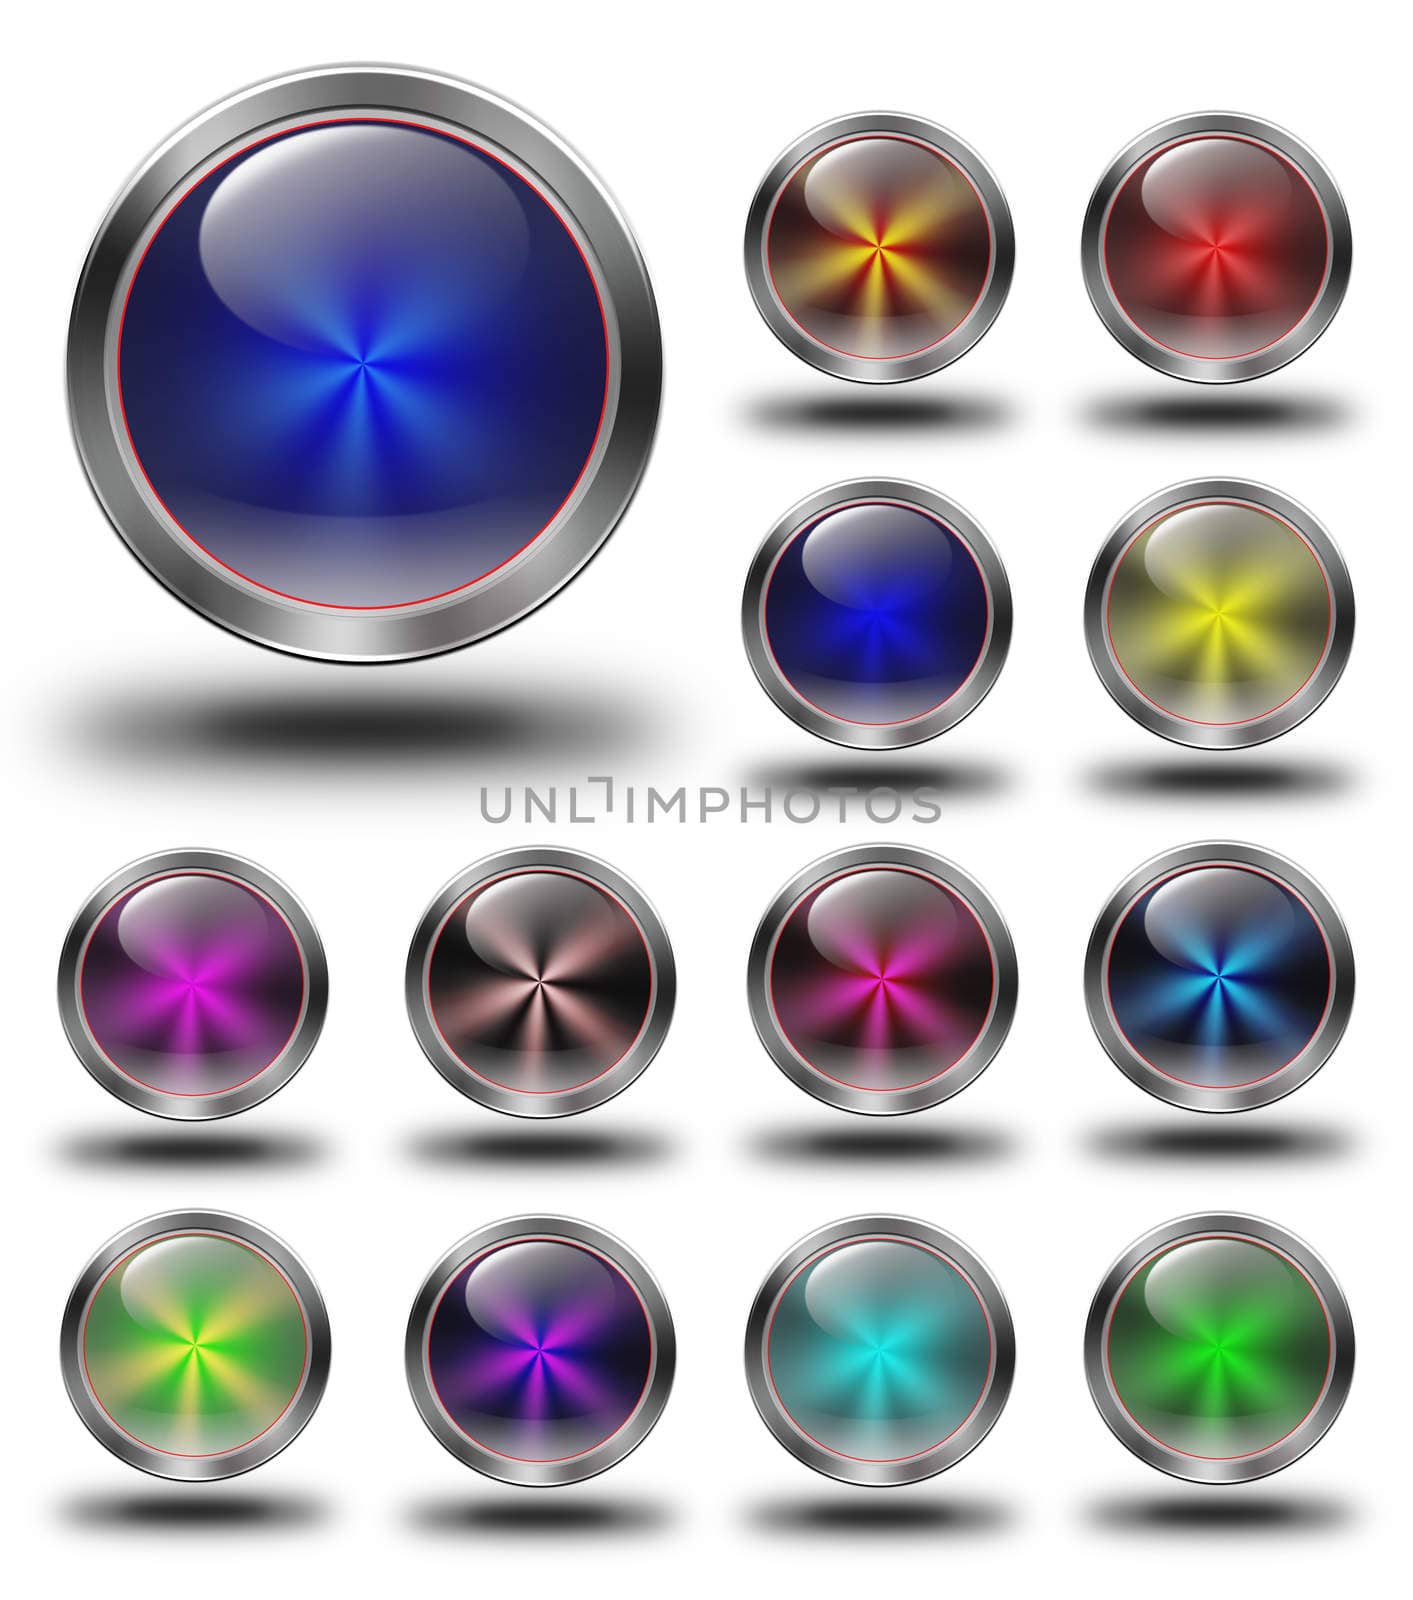 glossy icon, button, crazy colors, Glossy metallic buttons.